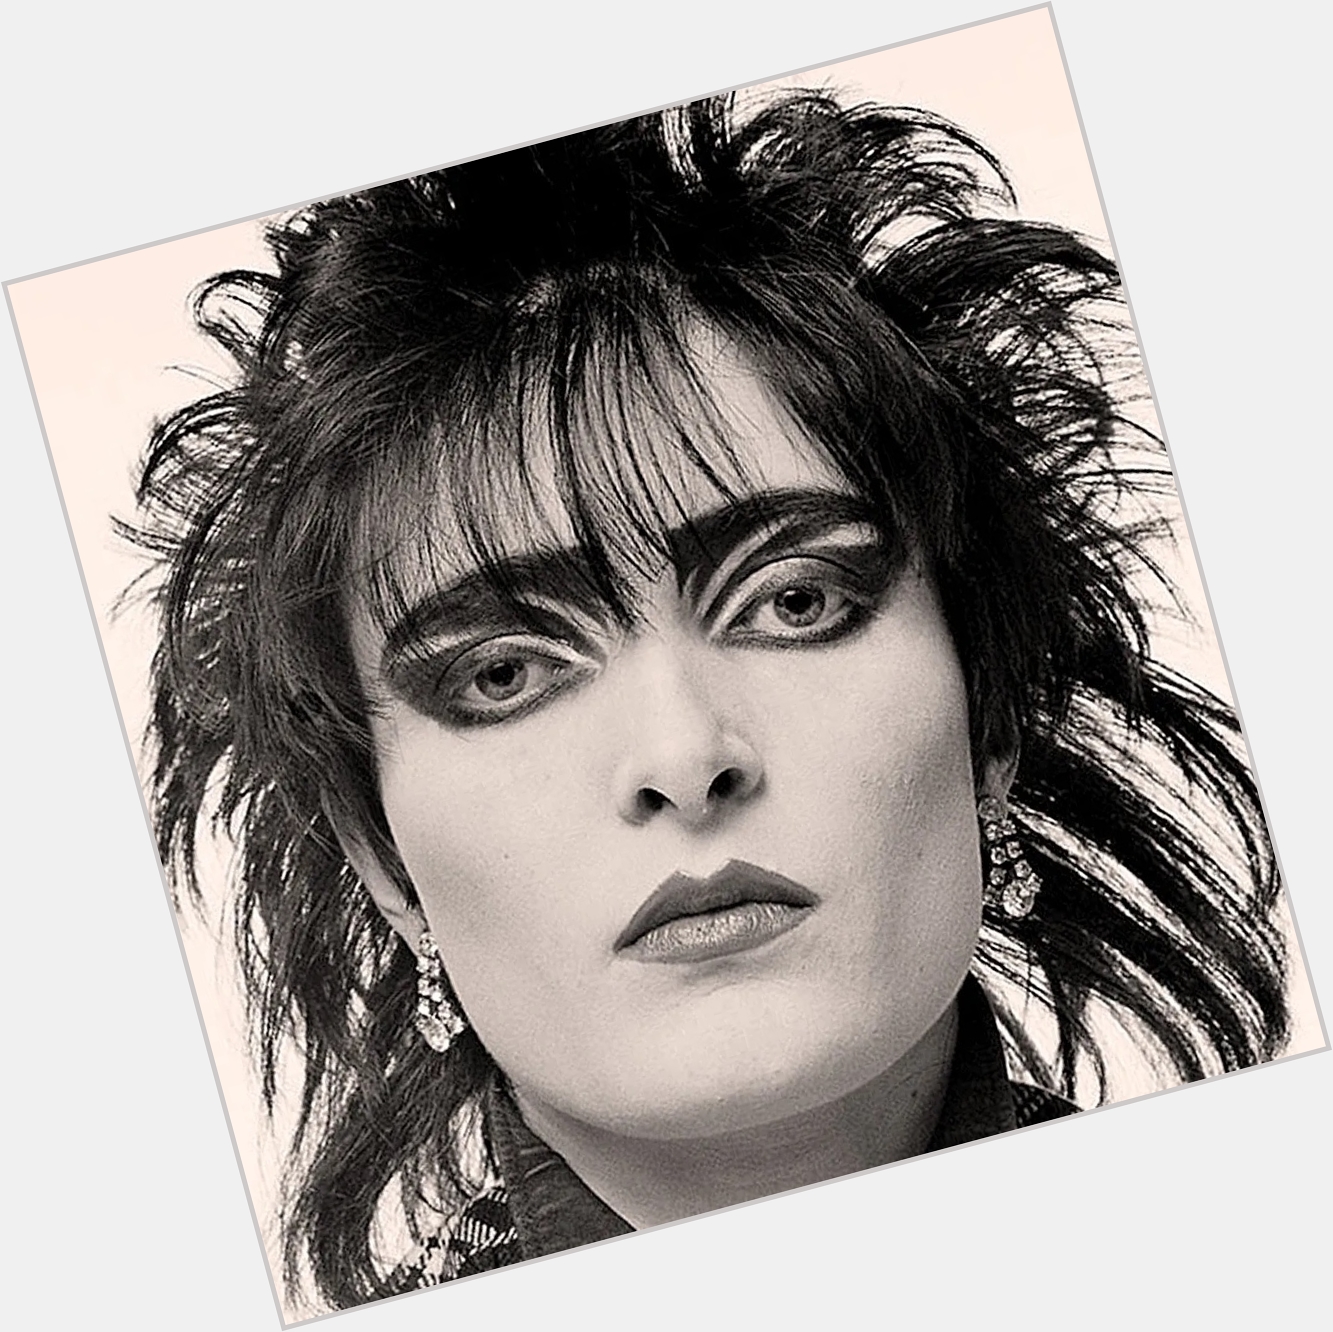 Happy Birthday to the legend Siouxsie Sioux! Born on this day. 